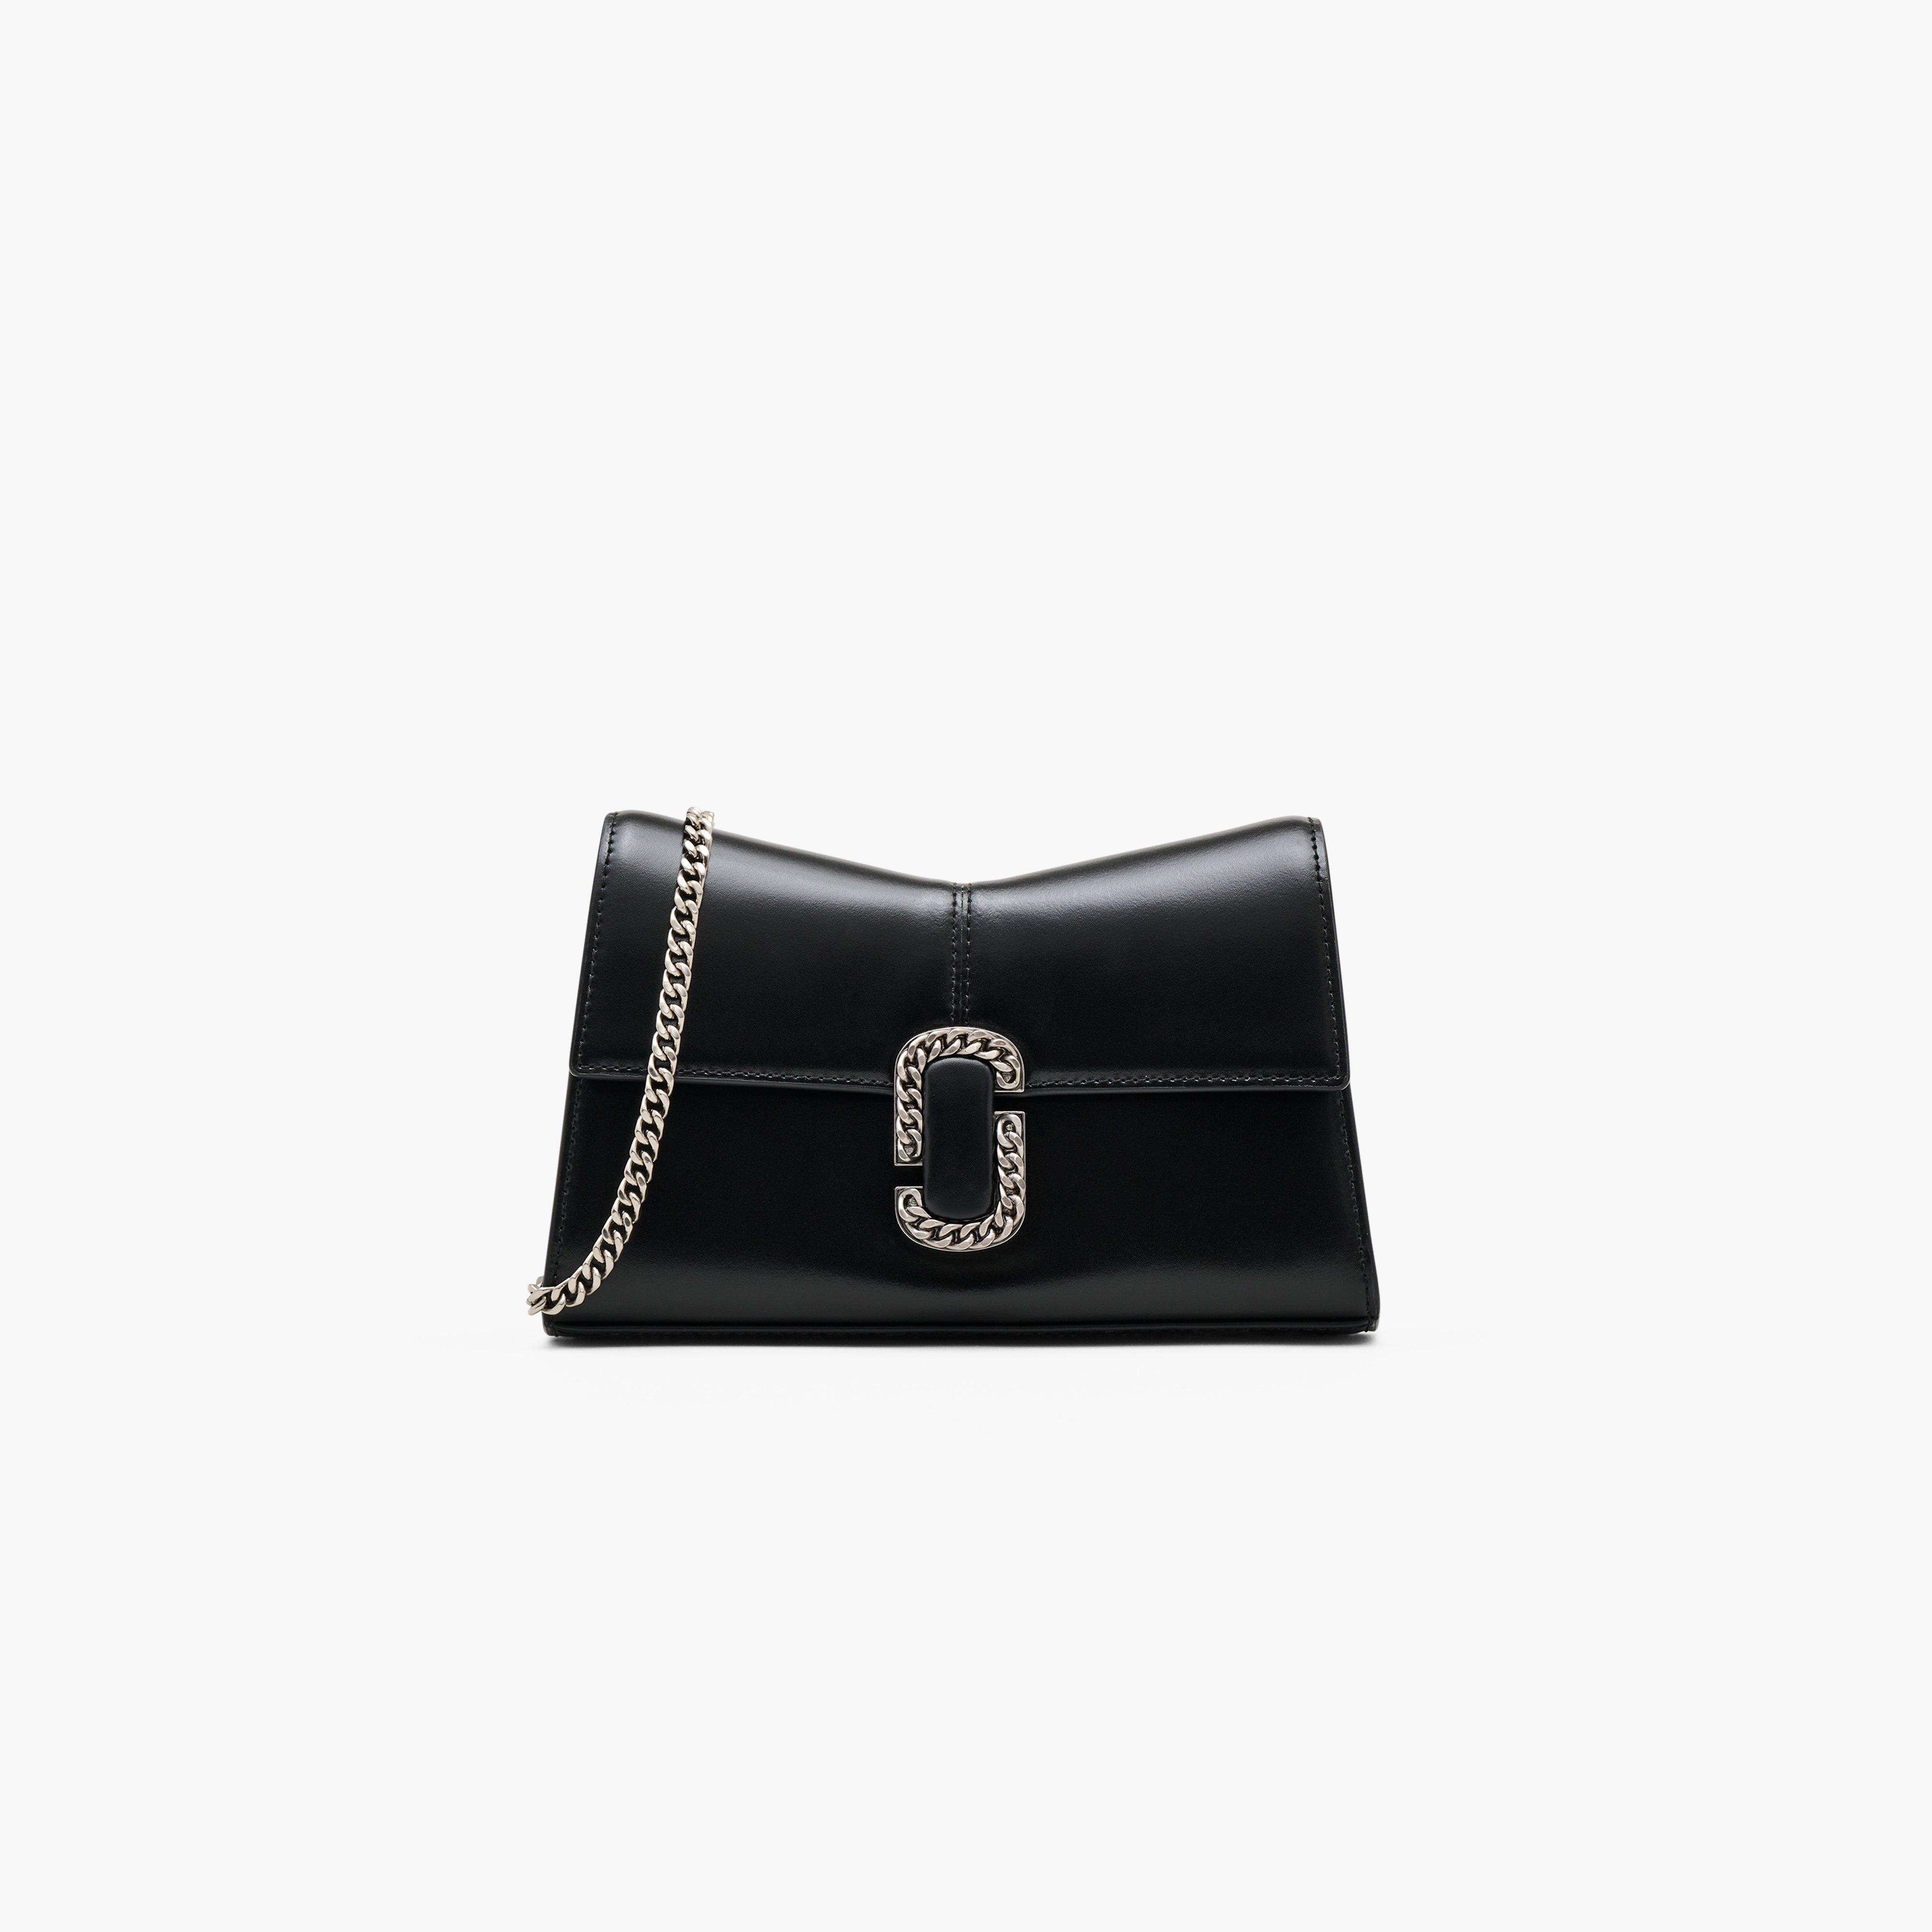 Marc by Marc jacobs The St. Marc Chain Wallet,BLACK/SILVER